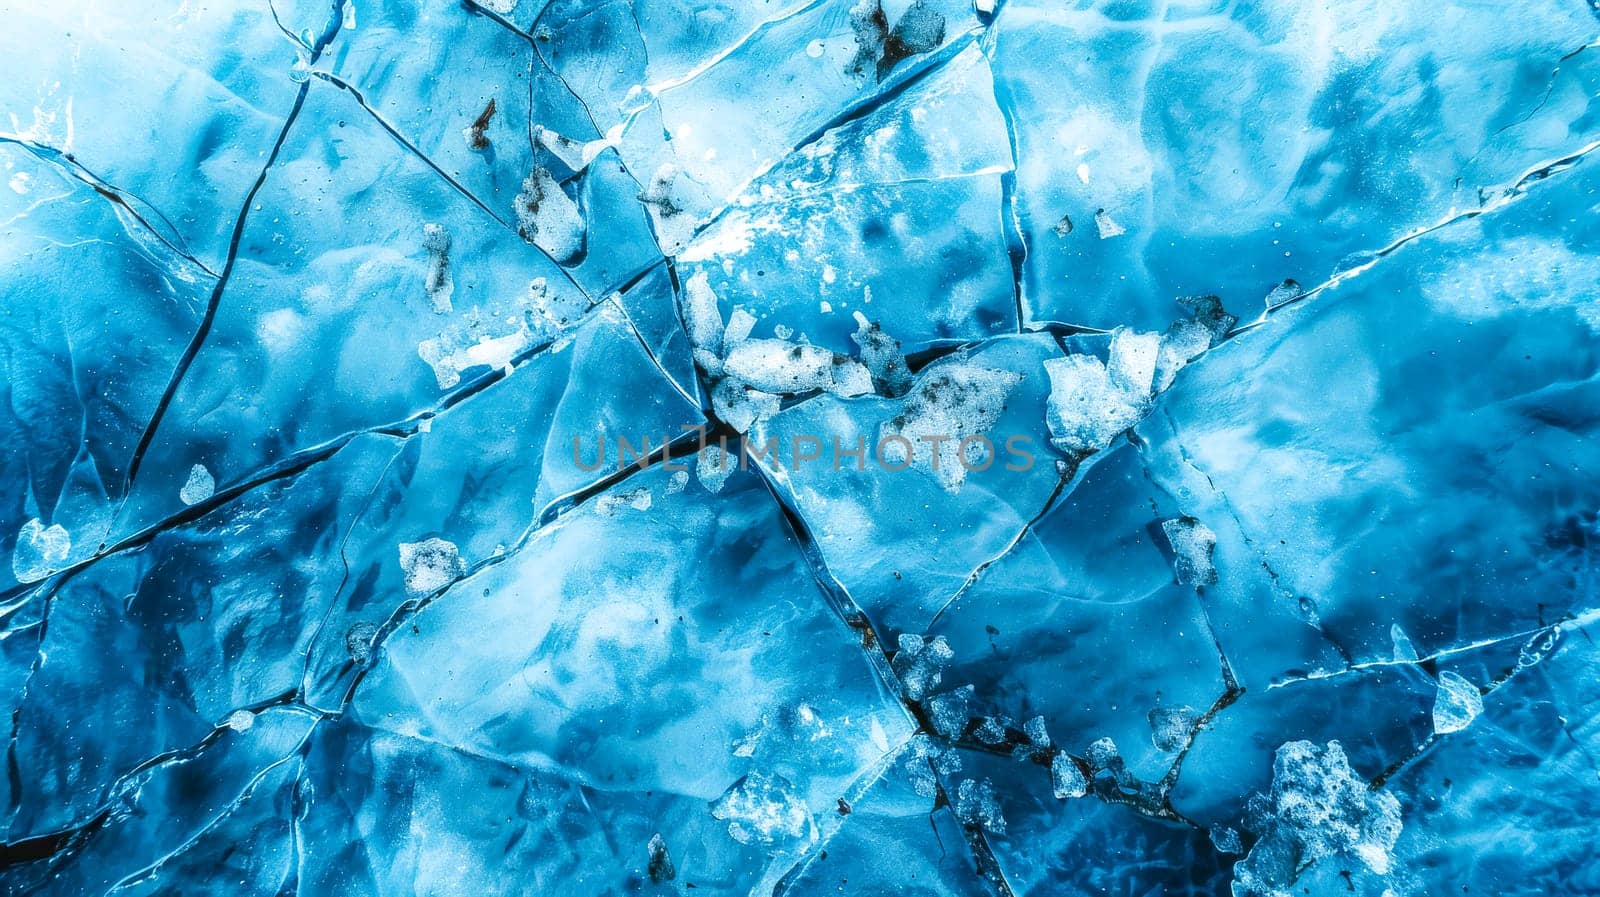 Abstract close-up of the intricate patterns in blue glacier ice by Edophoto